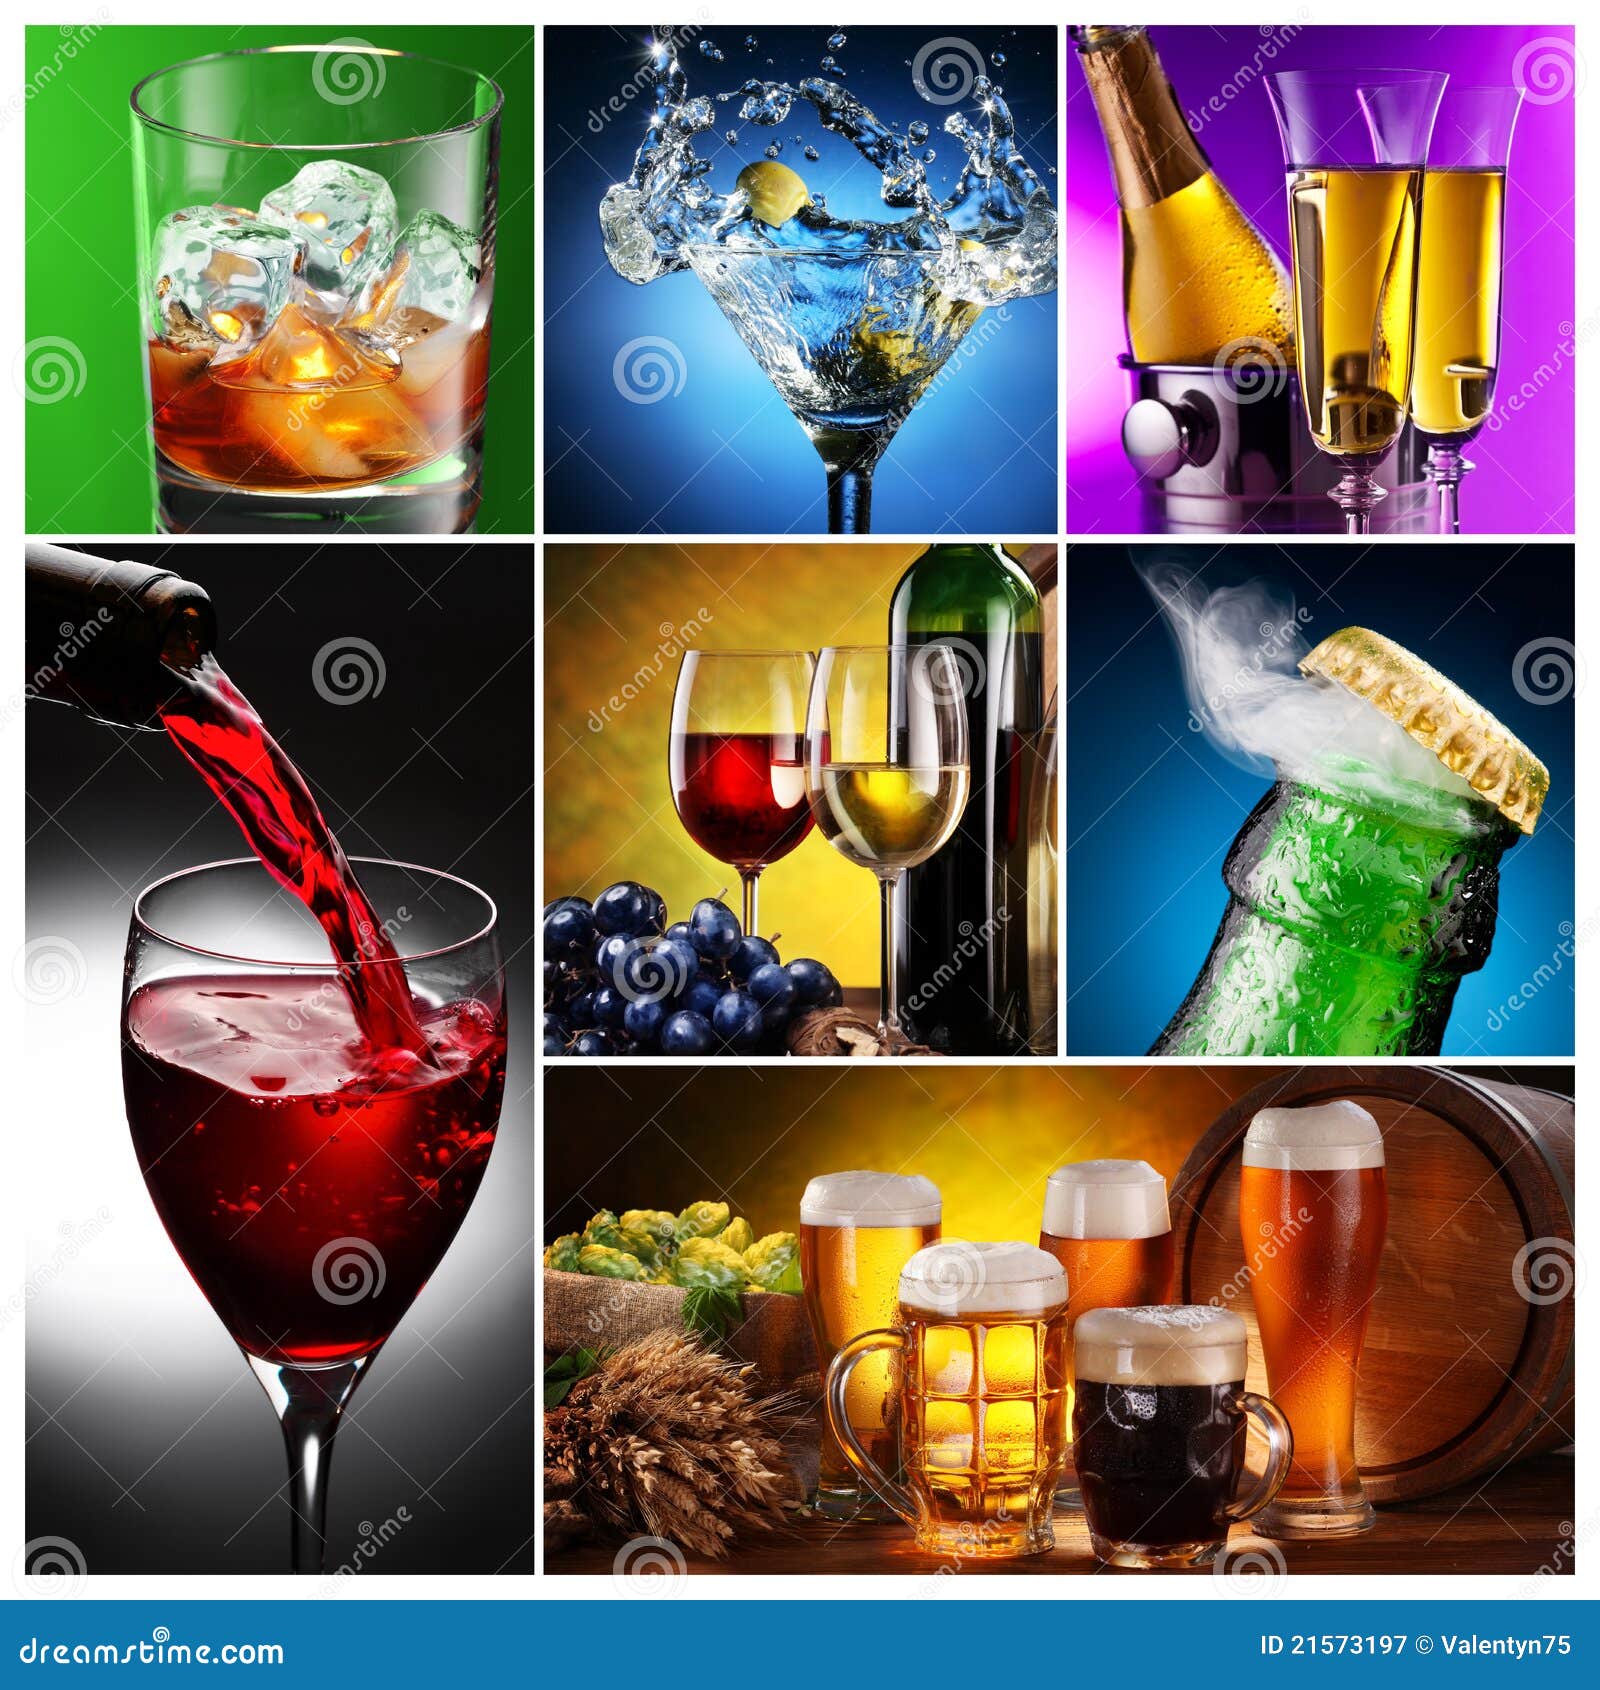 collection of images of alcohol.